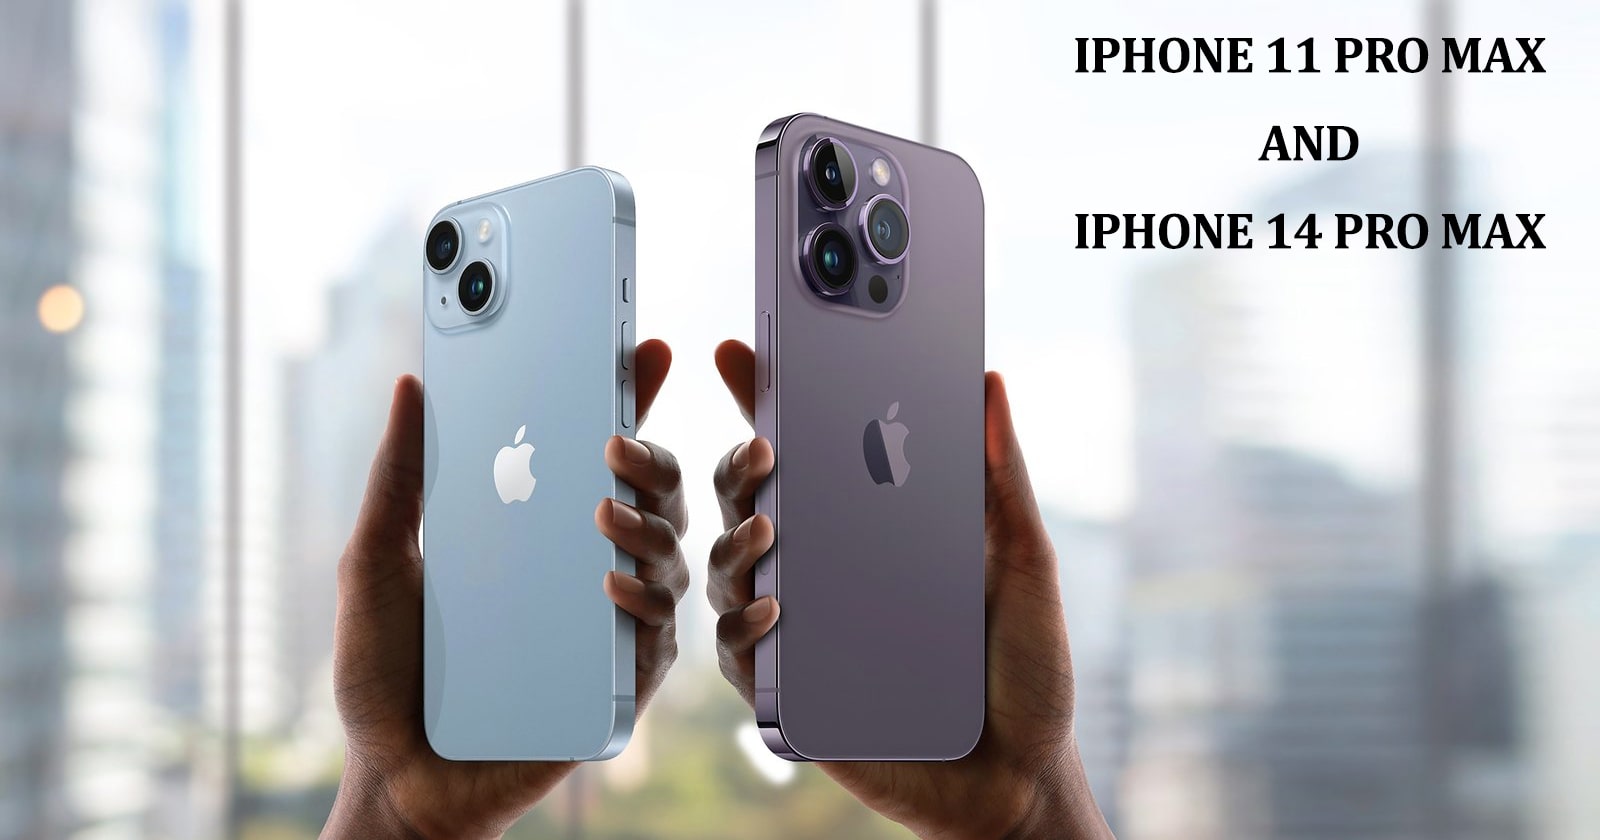 What Is the Difference Between iPhone 11 Pro Max and iPhone 14 Pro Max